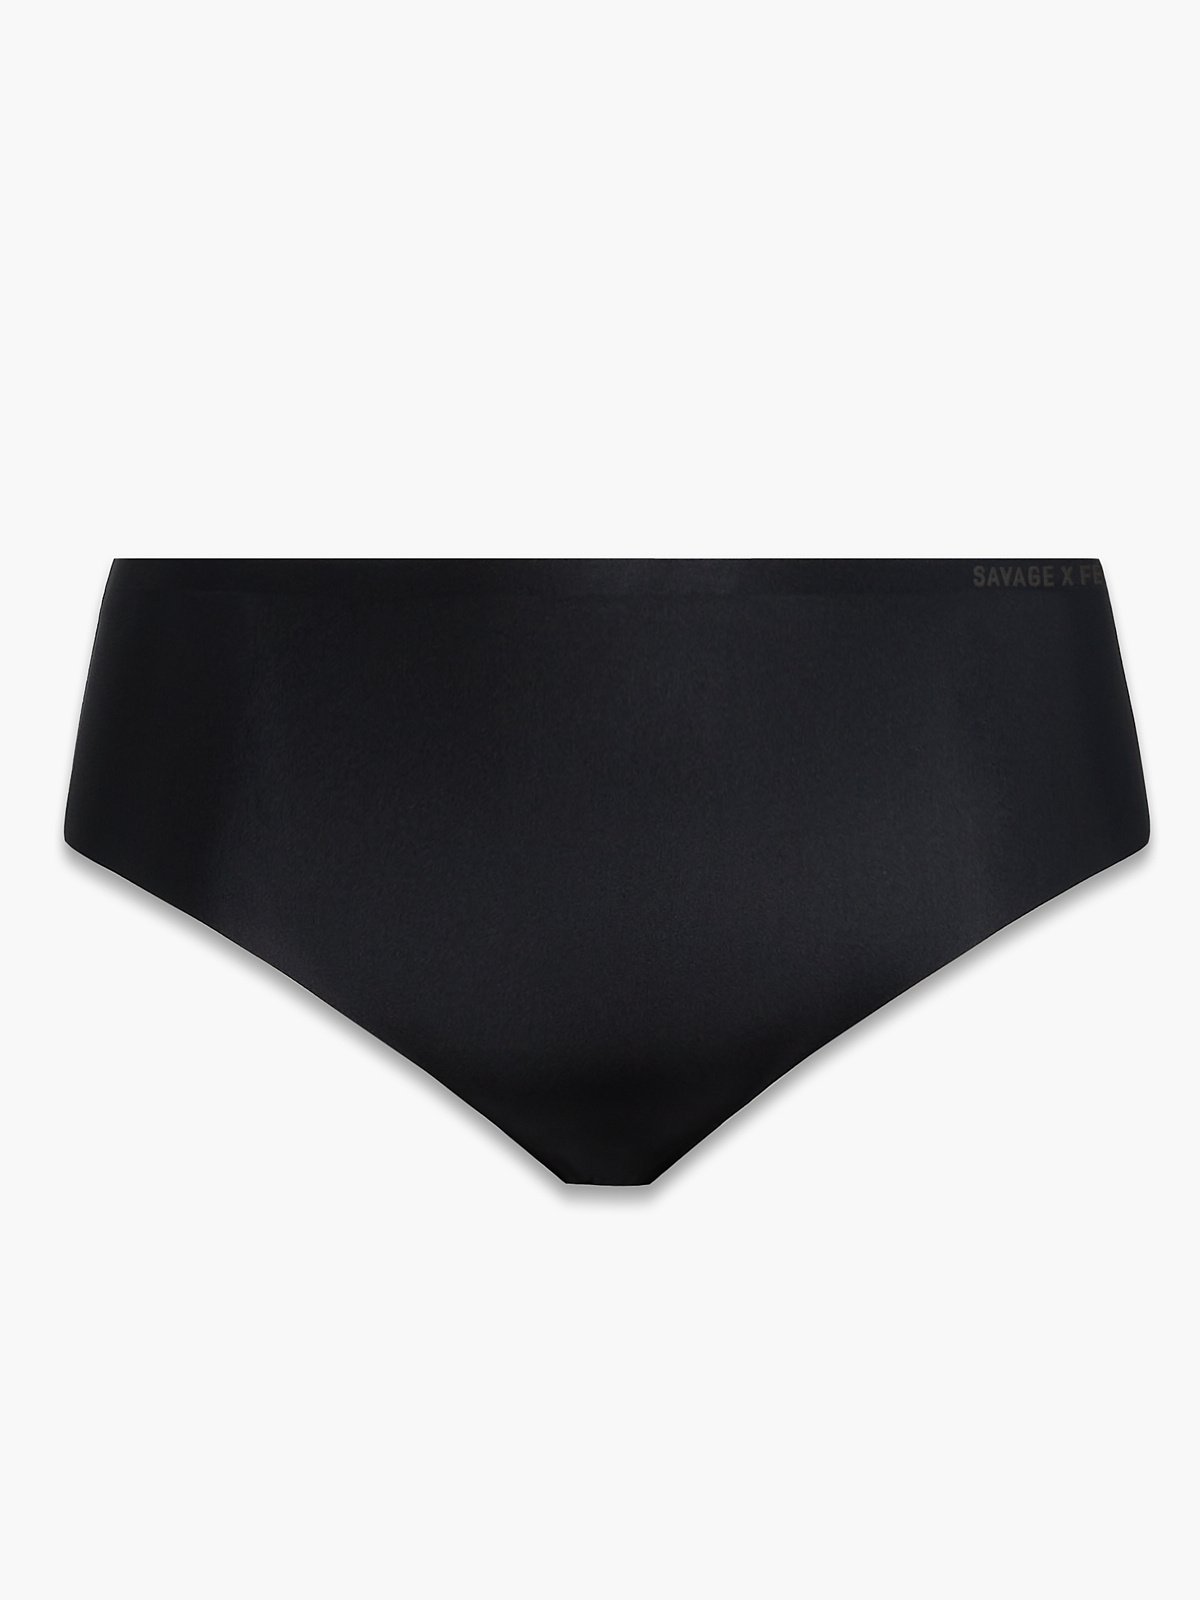 https://cdn.savagex.com/media/images/products/UD2356837-0687/MICROFIBER-NO-SHOW-HIPSTER-PANTY-UD2356837-0687-LAYDOWN-1200x1600.jpg